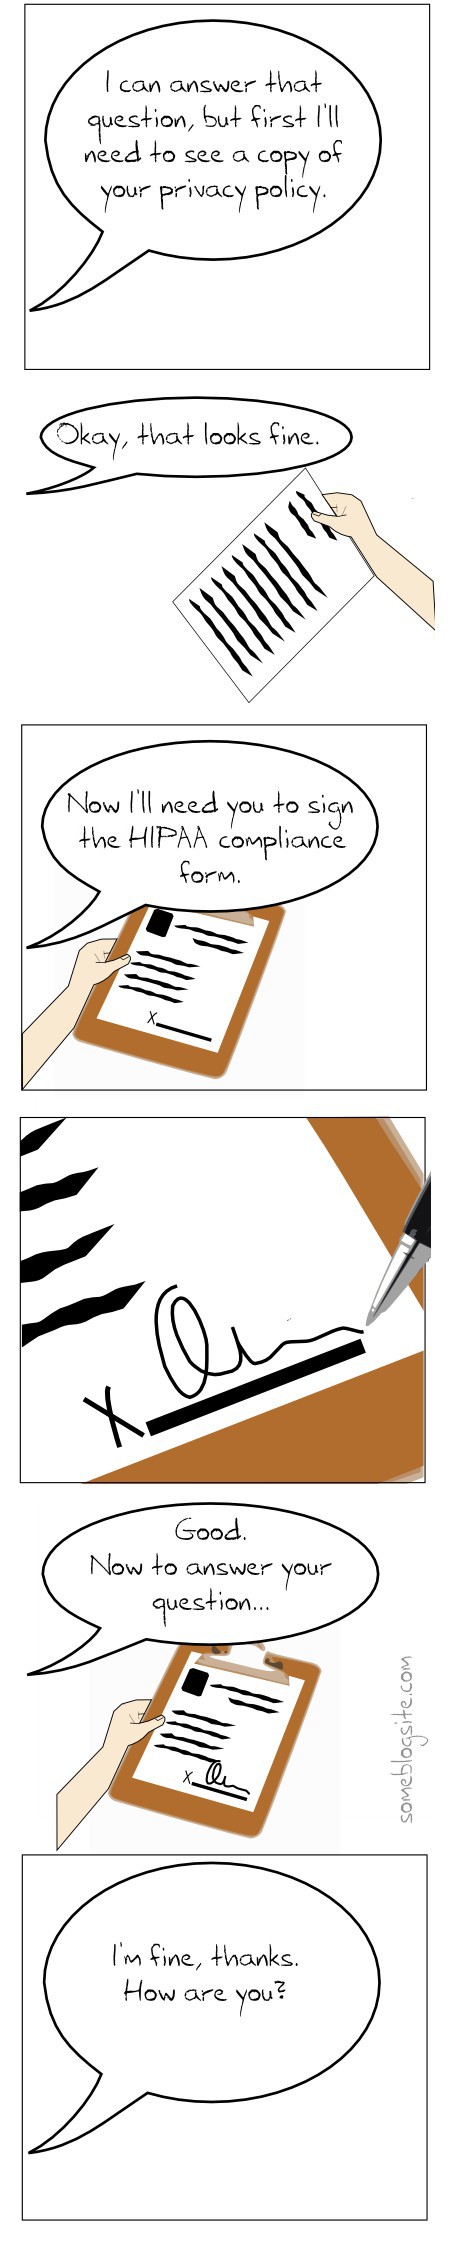 comic about having to sign a HIPAA form just to answer the question 'How are you?'